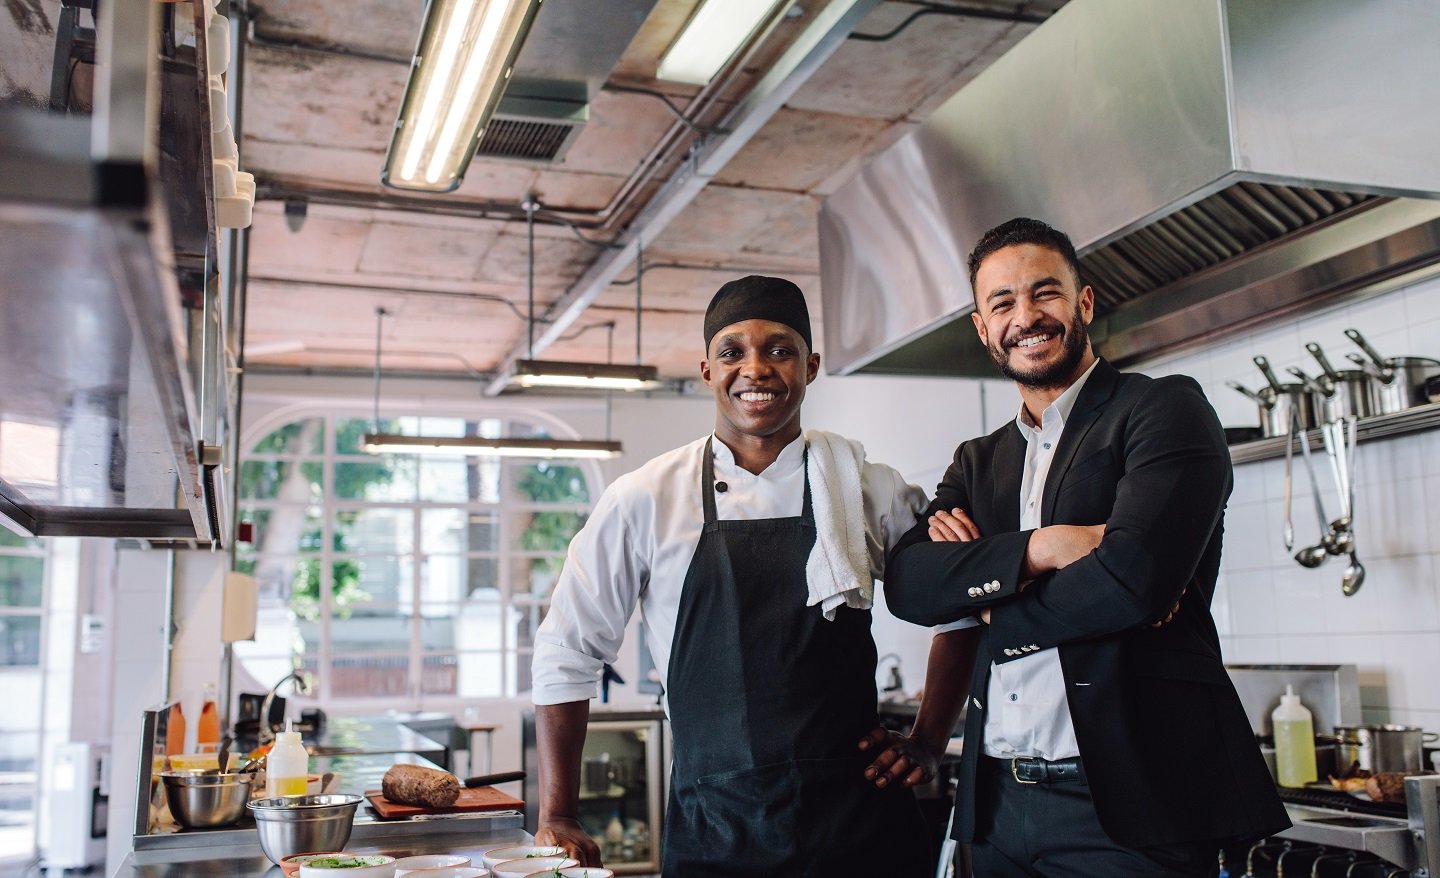 Hospitality Management Careers: Top 7 Hospitality Jobs for Foodies